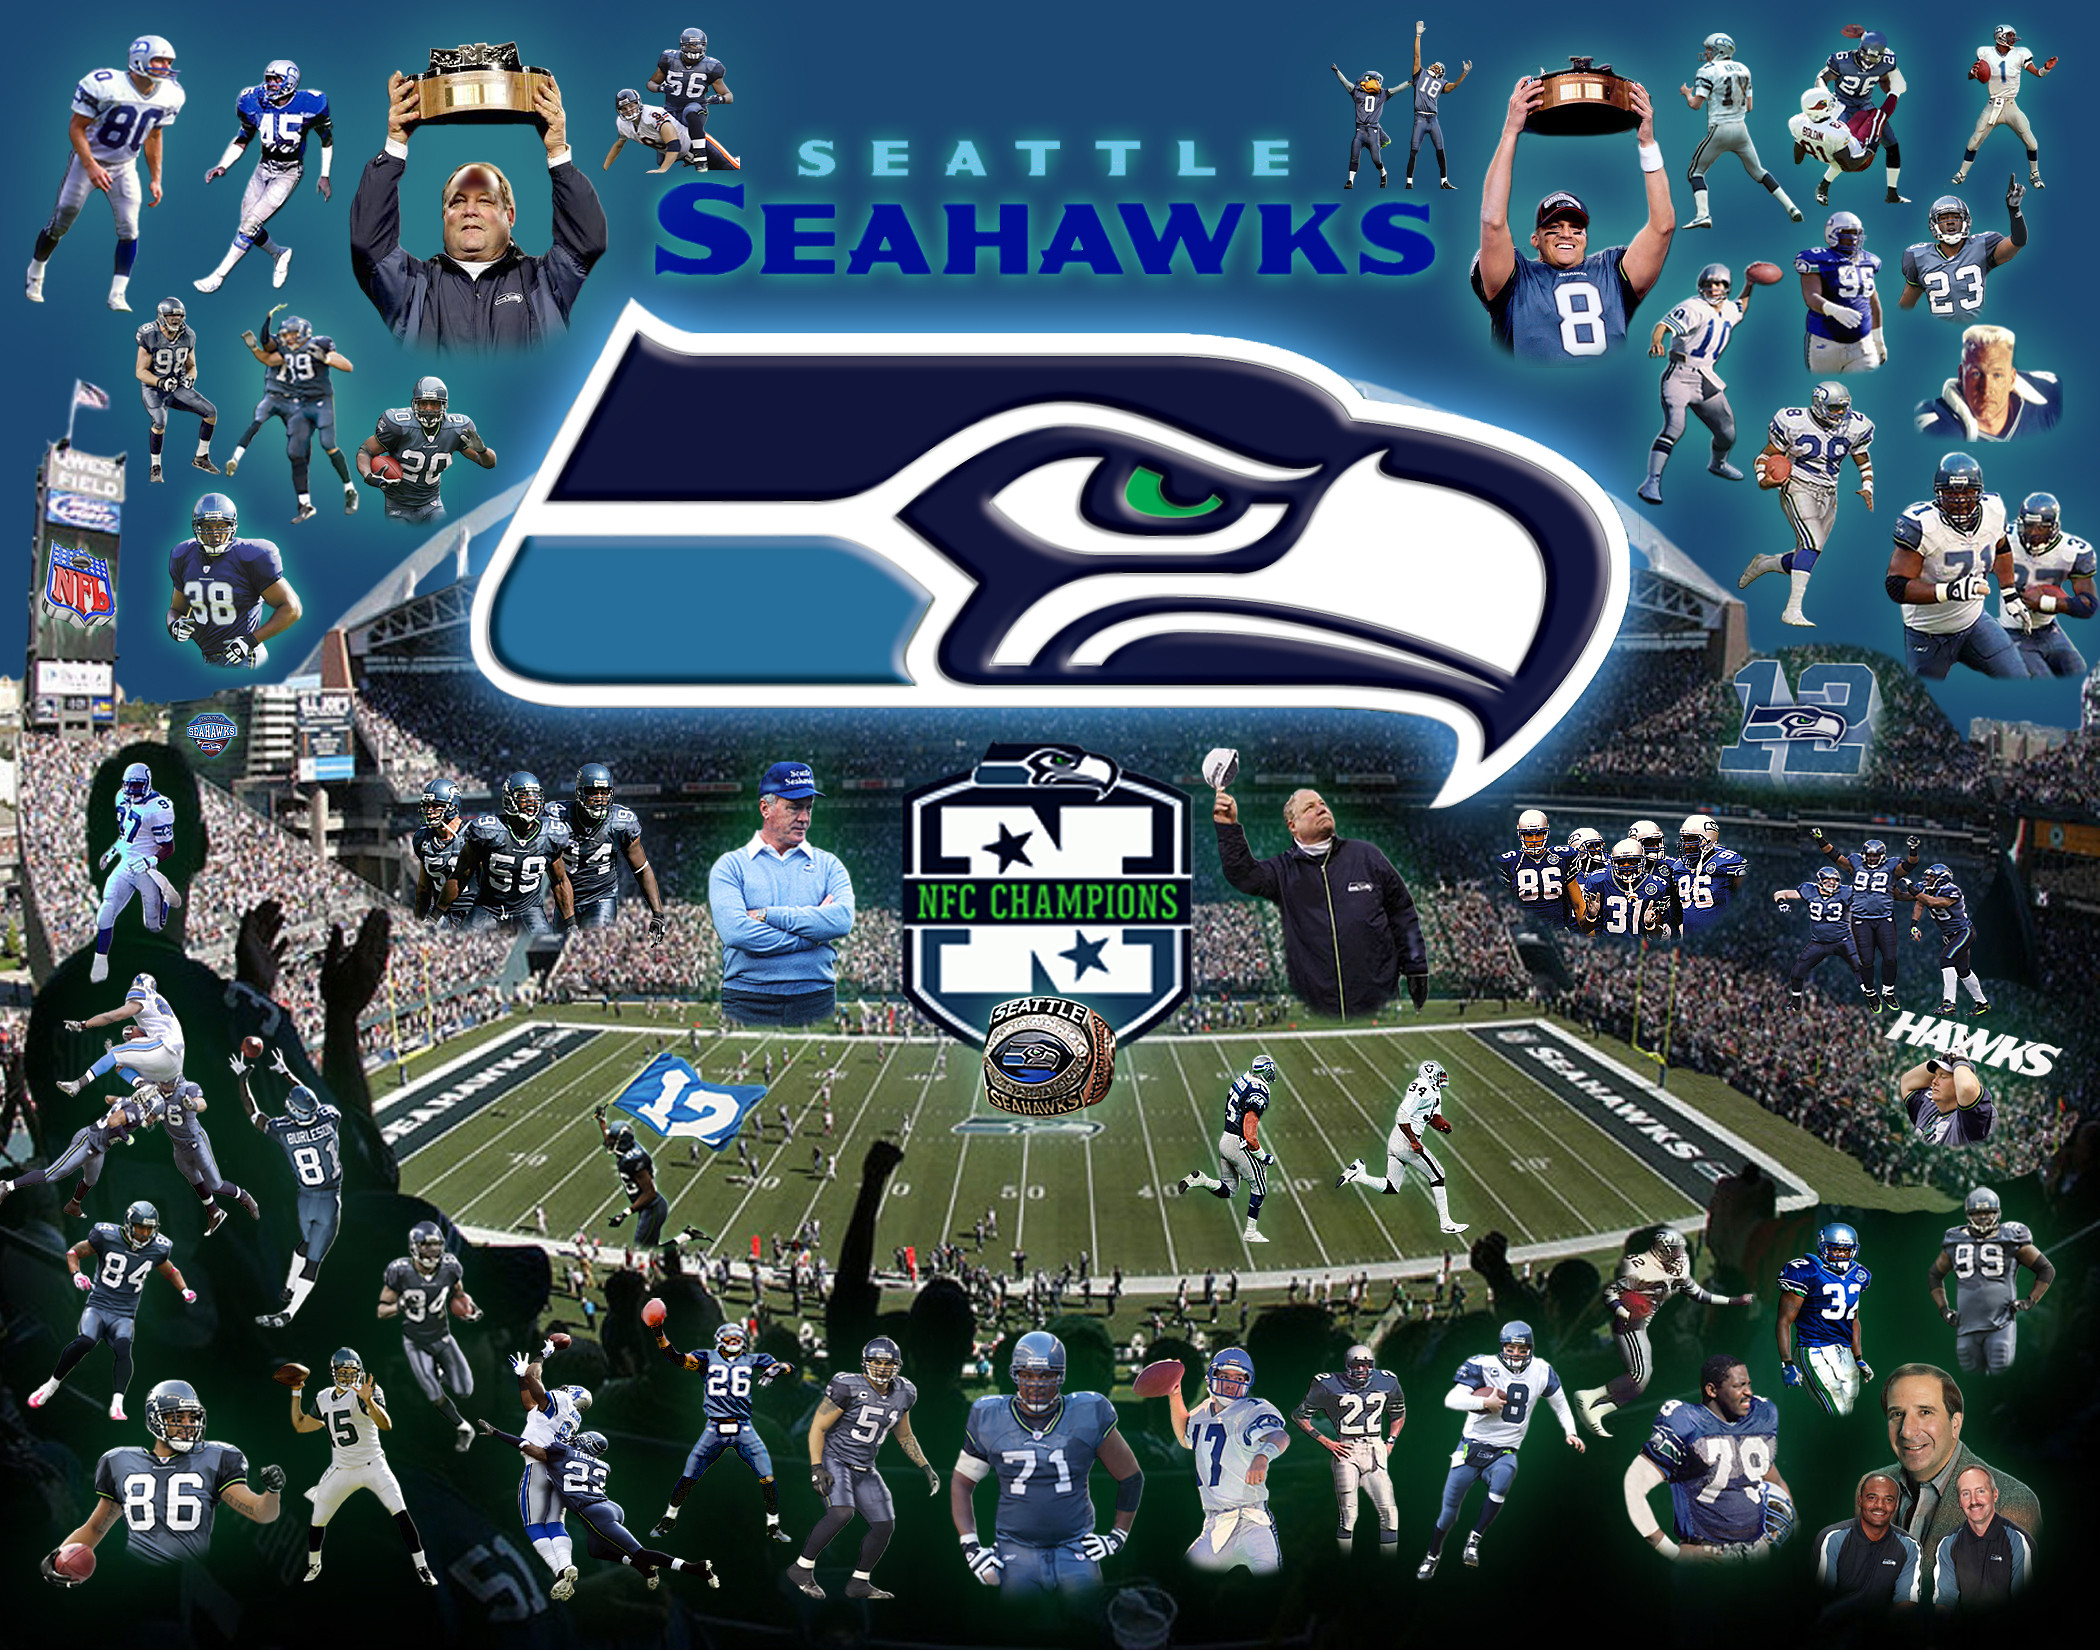 2100x1650 Seattle images SEAHAWKS! HD wallpaper and background photos